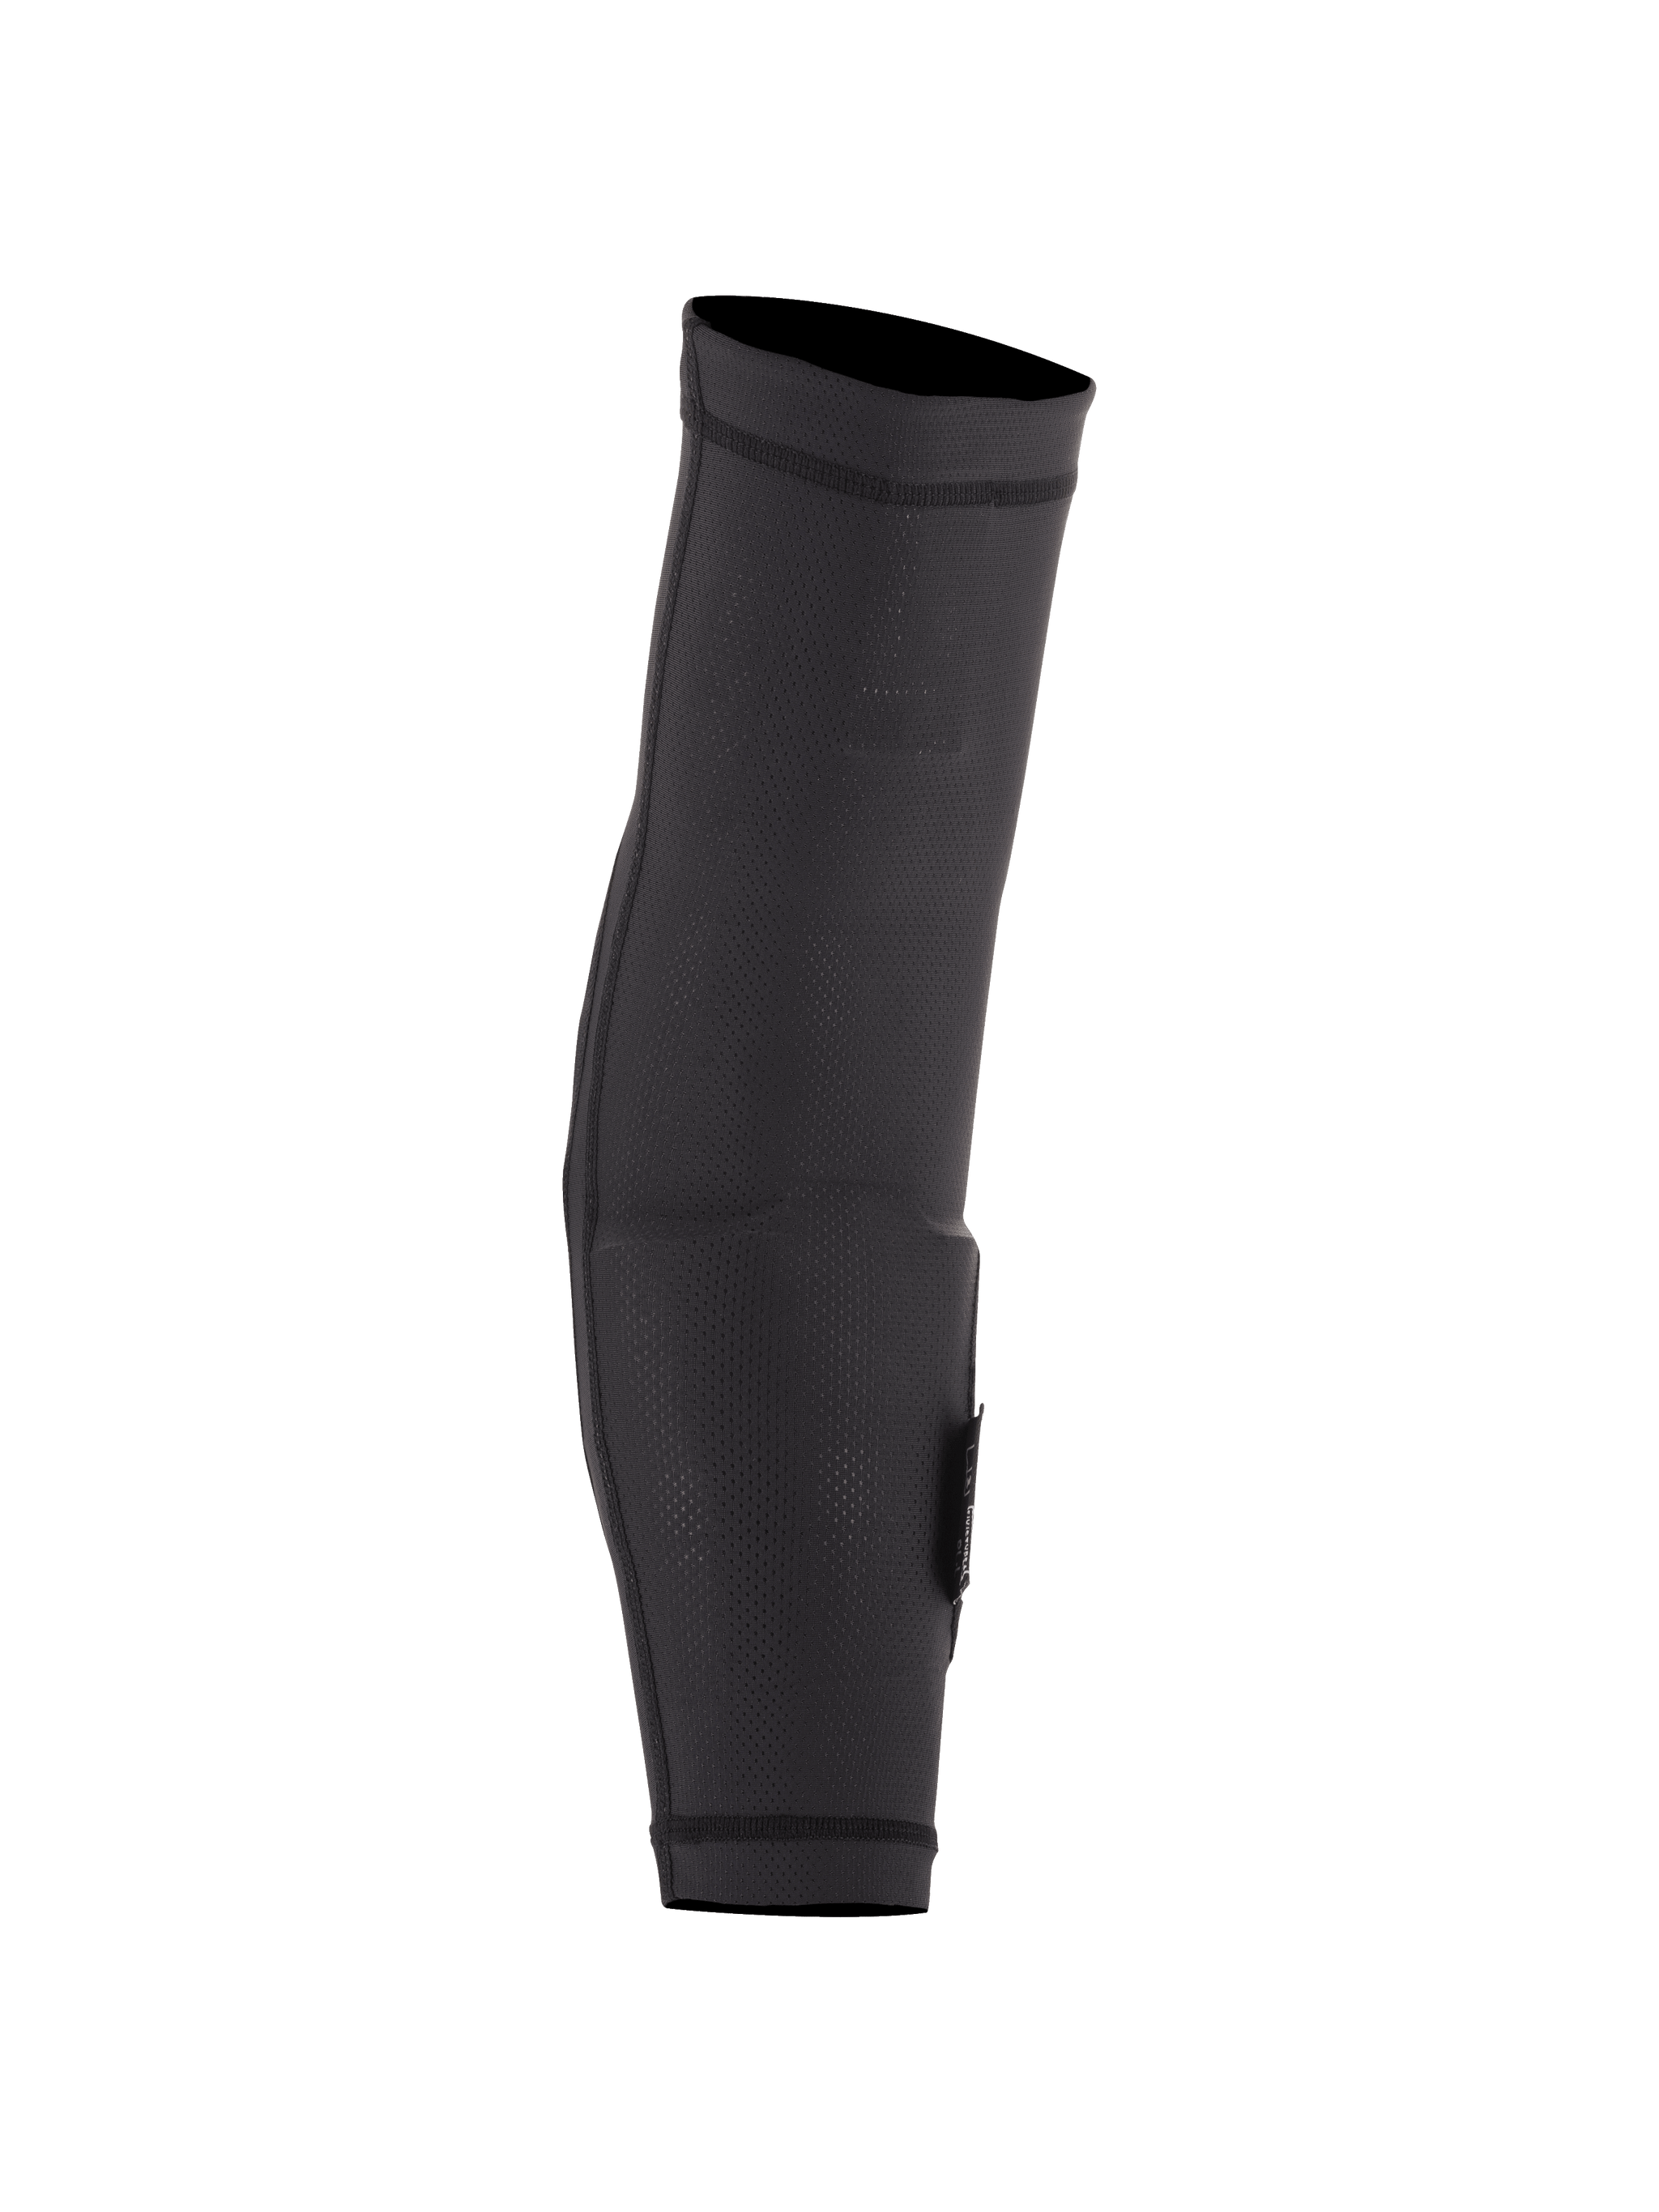 Youth Paragon Lite Elbow Protector